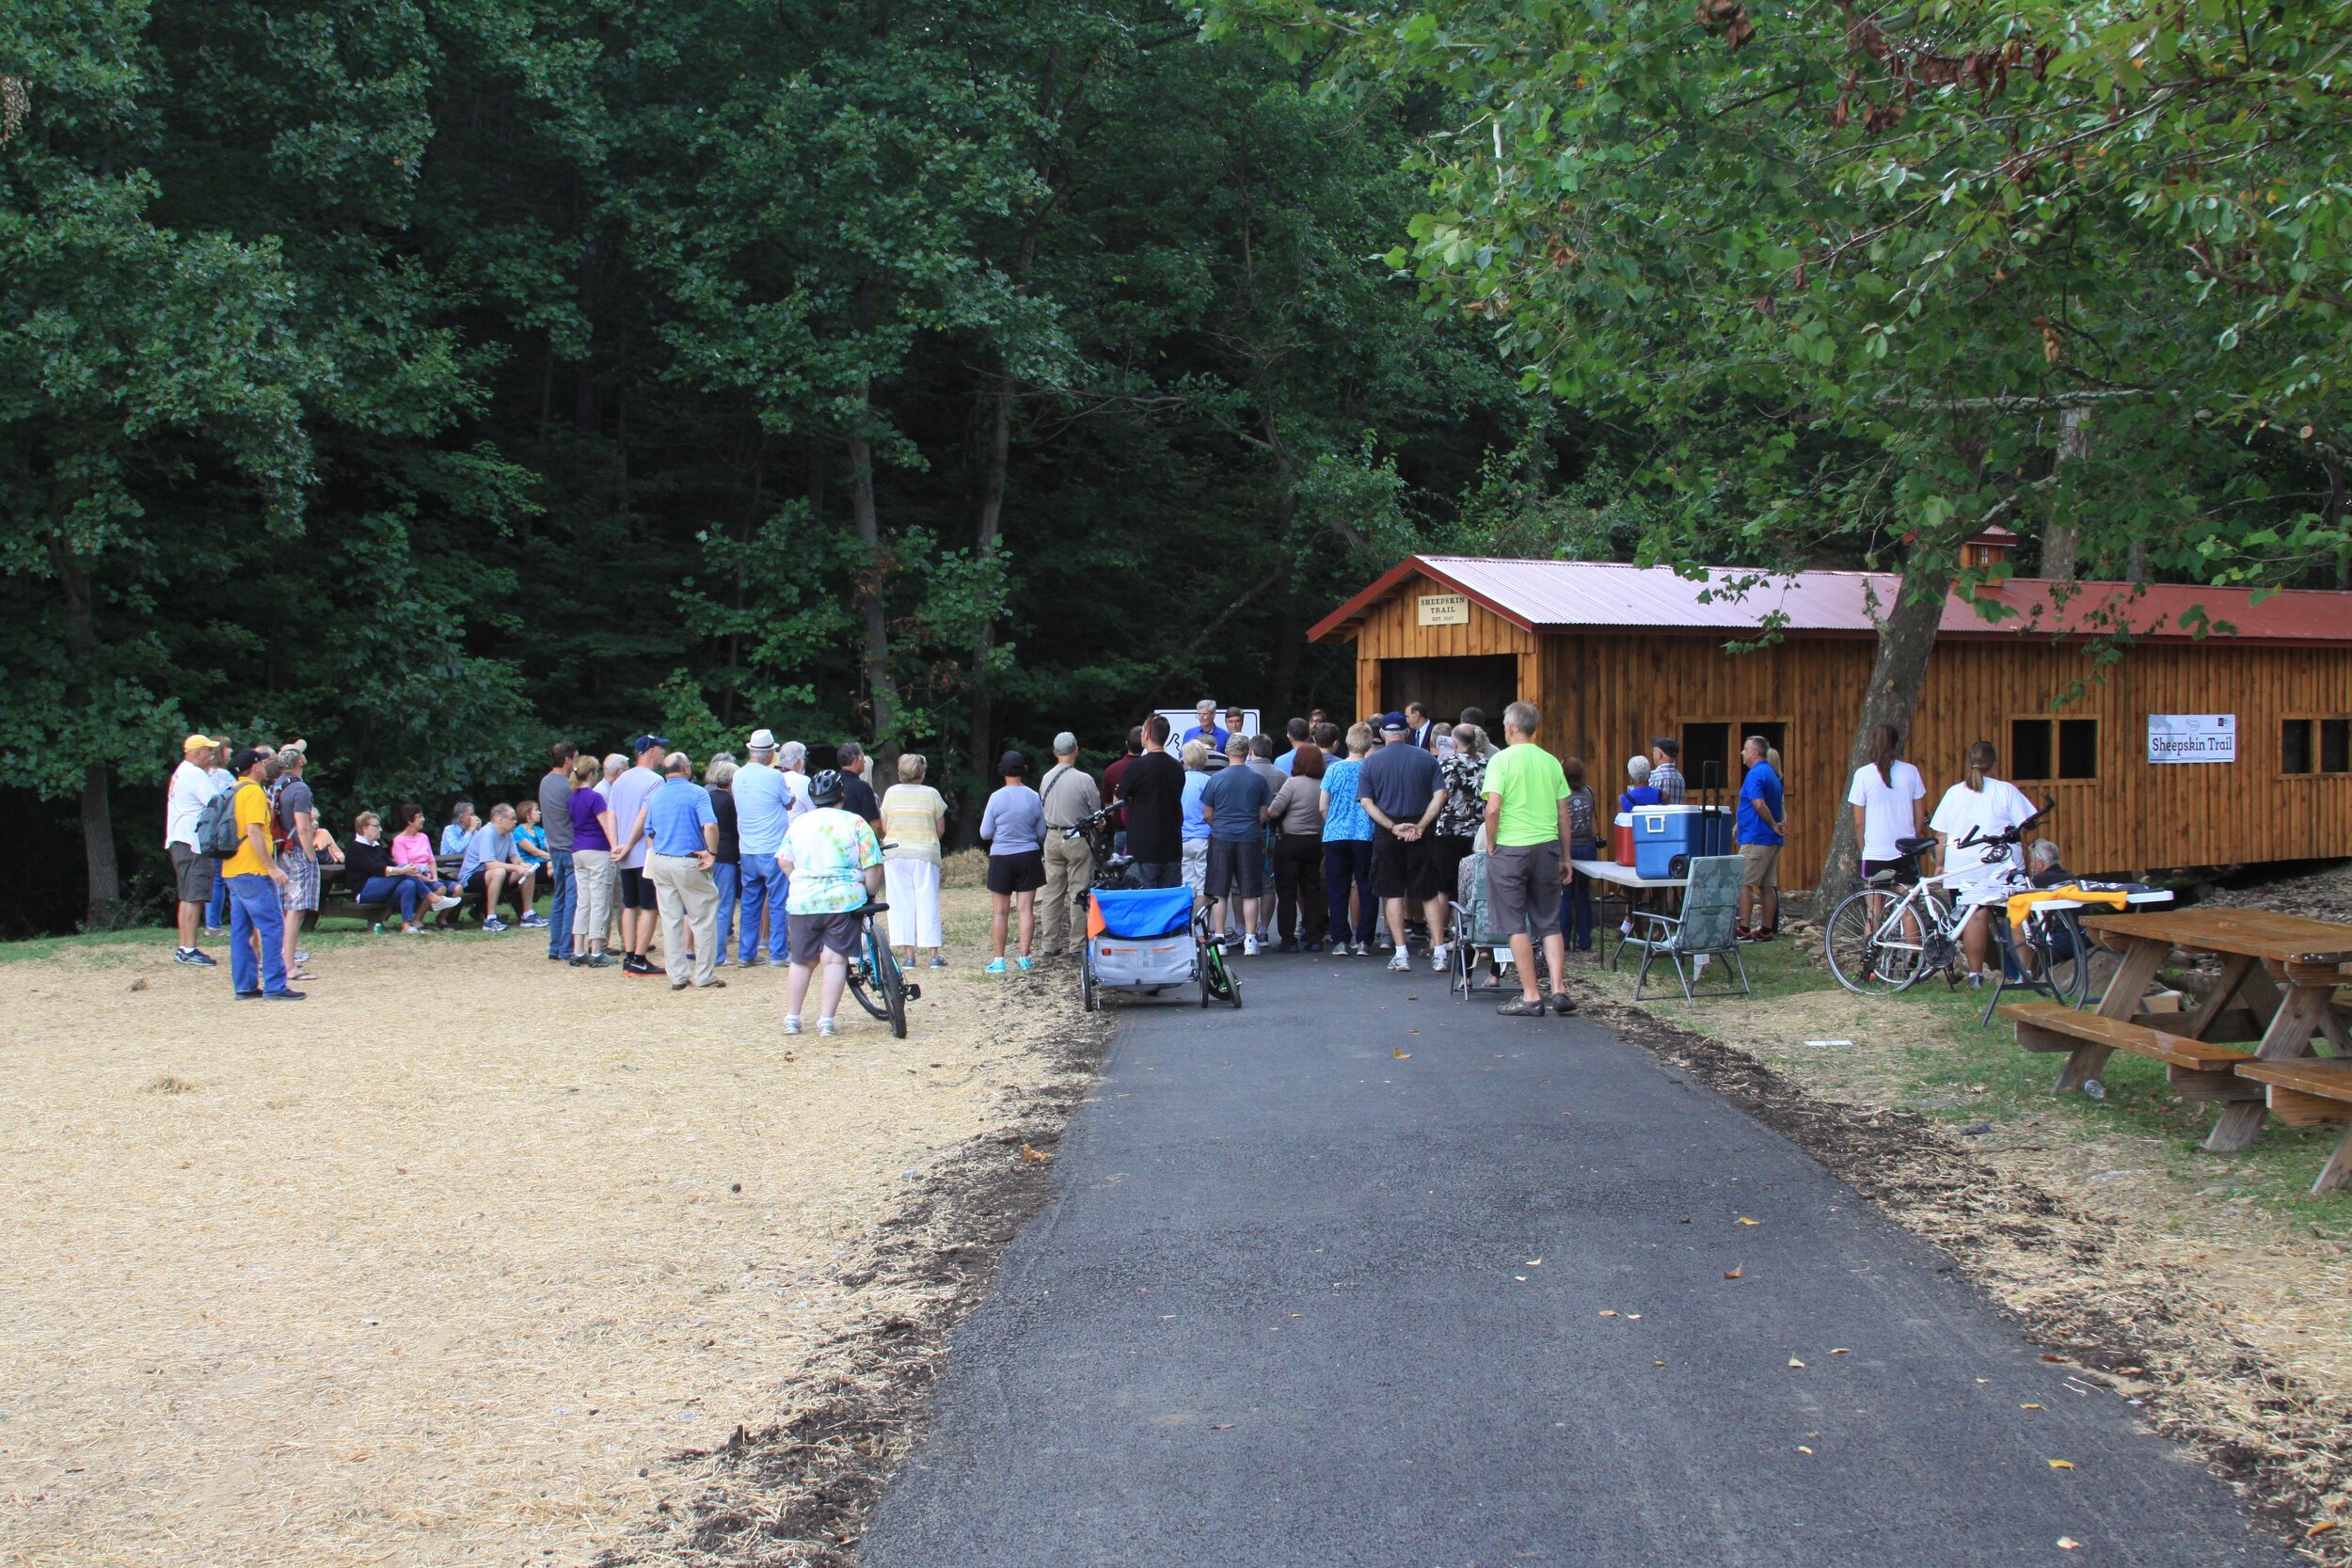 A large group of trail enthusiasts gather at the Hutchinson Park covered bridge